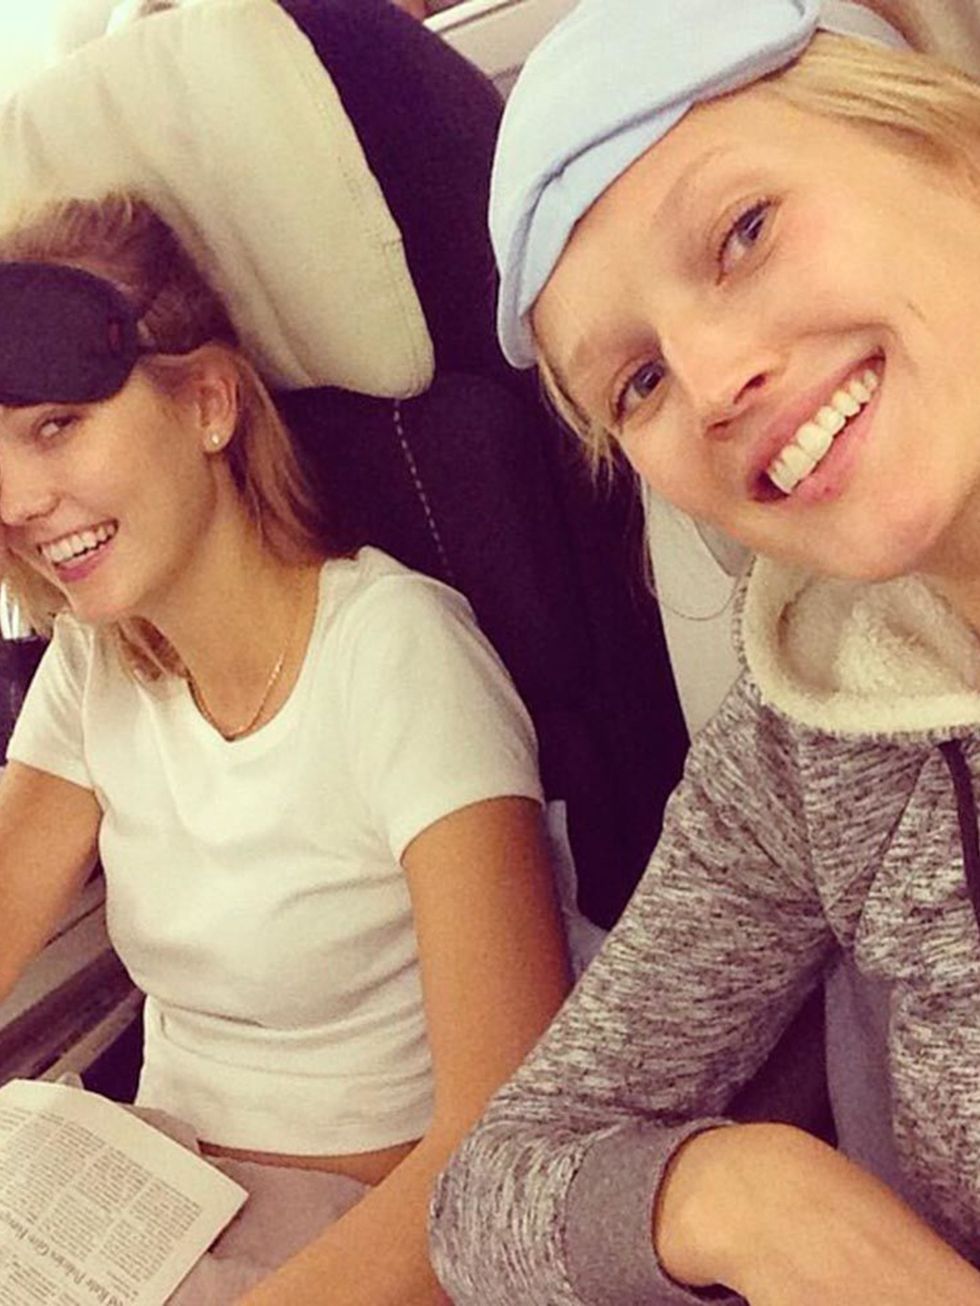 Karlie Kloss
(@supermodelkarlie)

'Regram from @Toni_Garrn in the plane on the way back home from Paris'